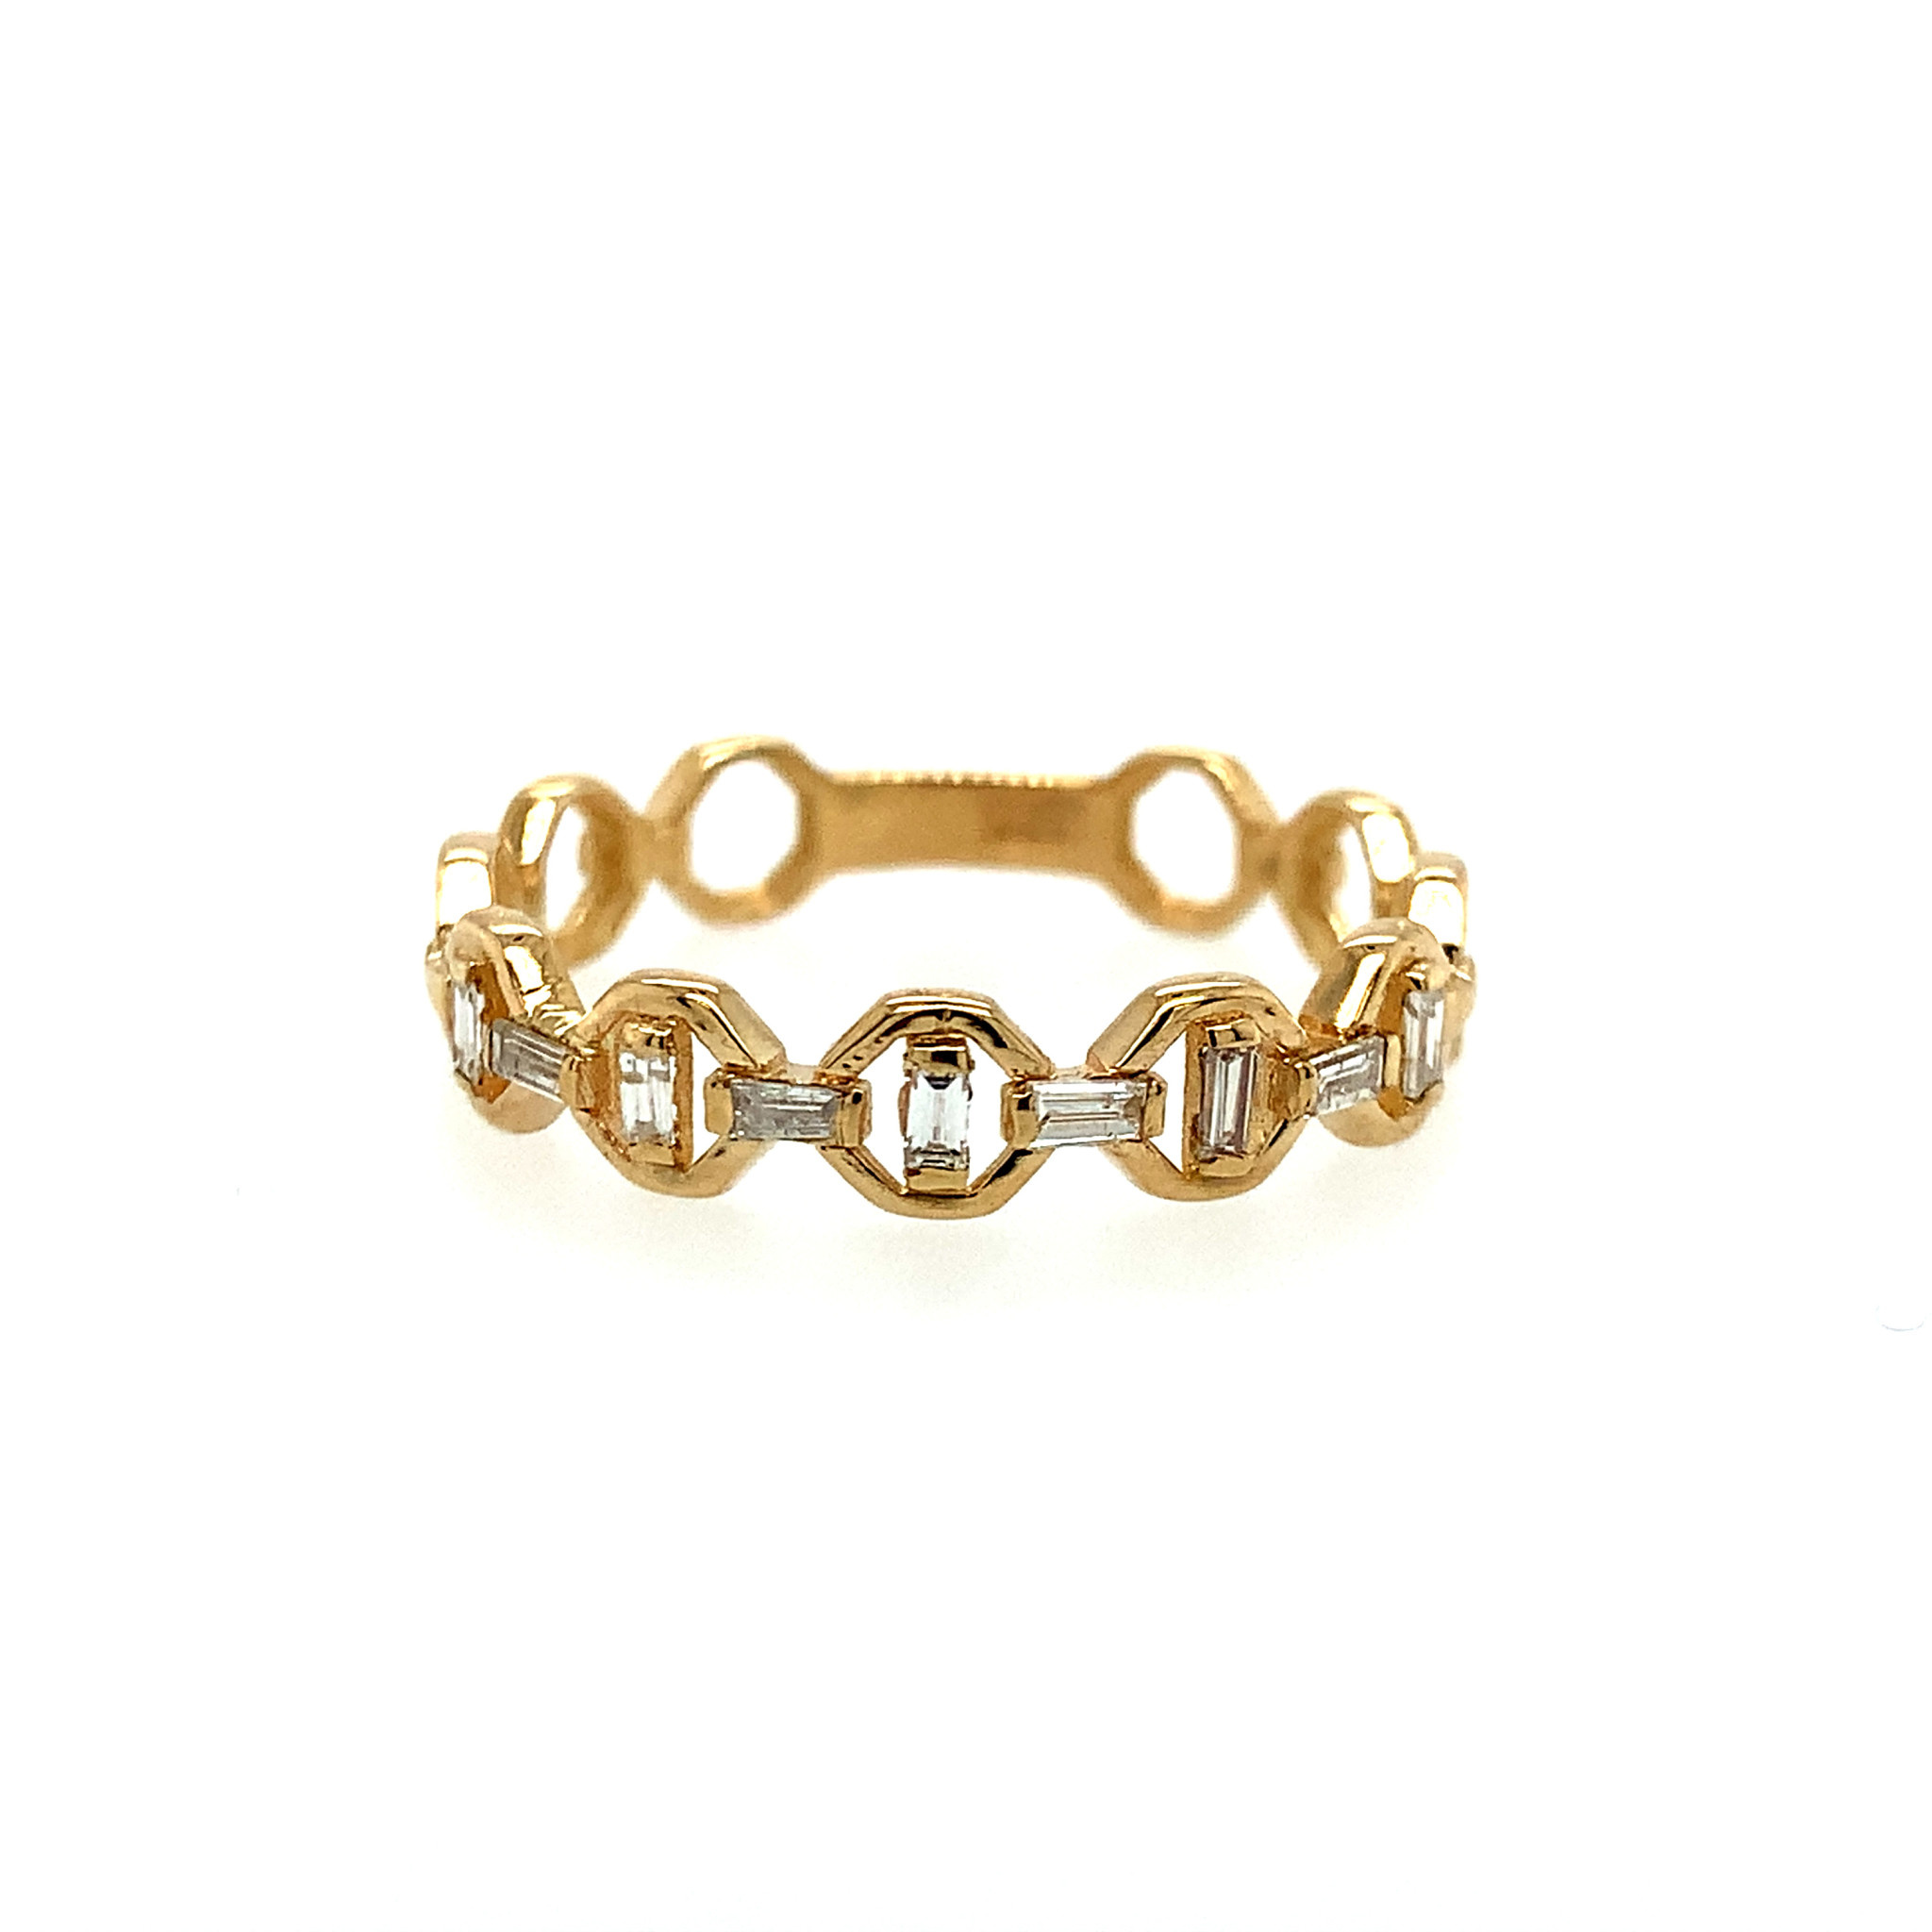 40180 14K YELLOW GOLD OPEN HEXAGON LINK WITH BAGUETTE DIAMONDS BAND RING